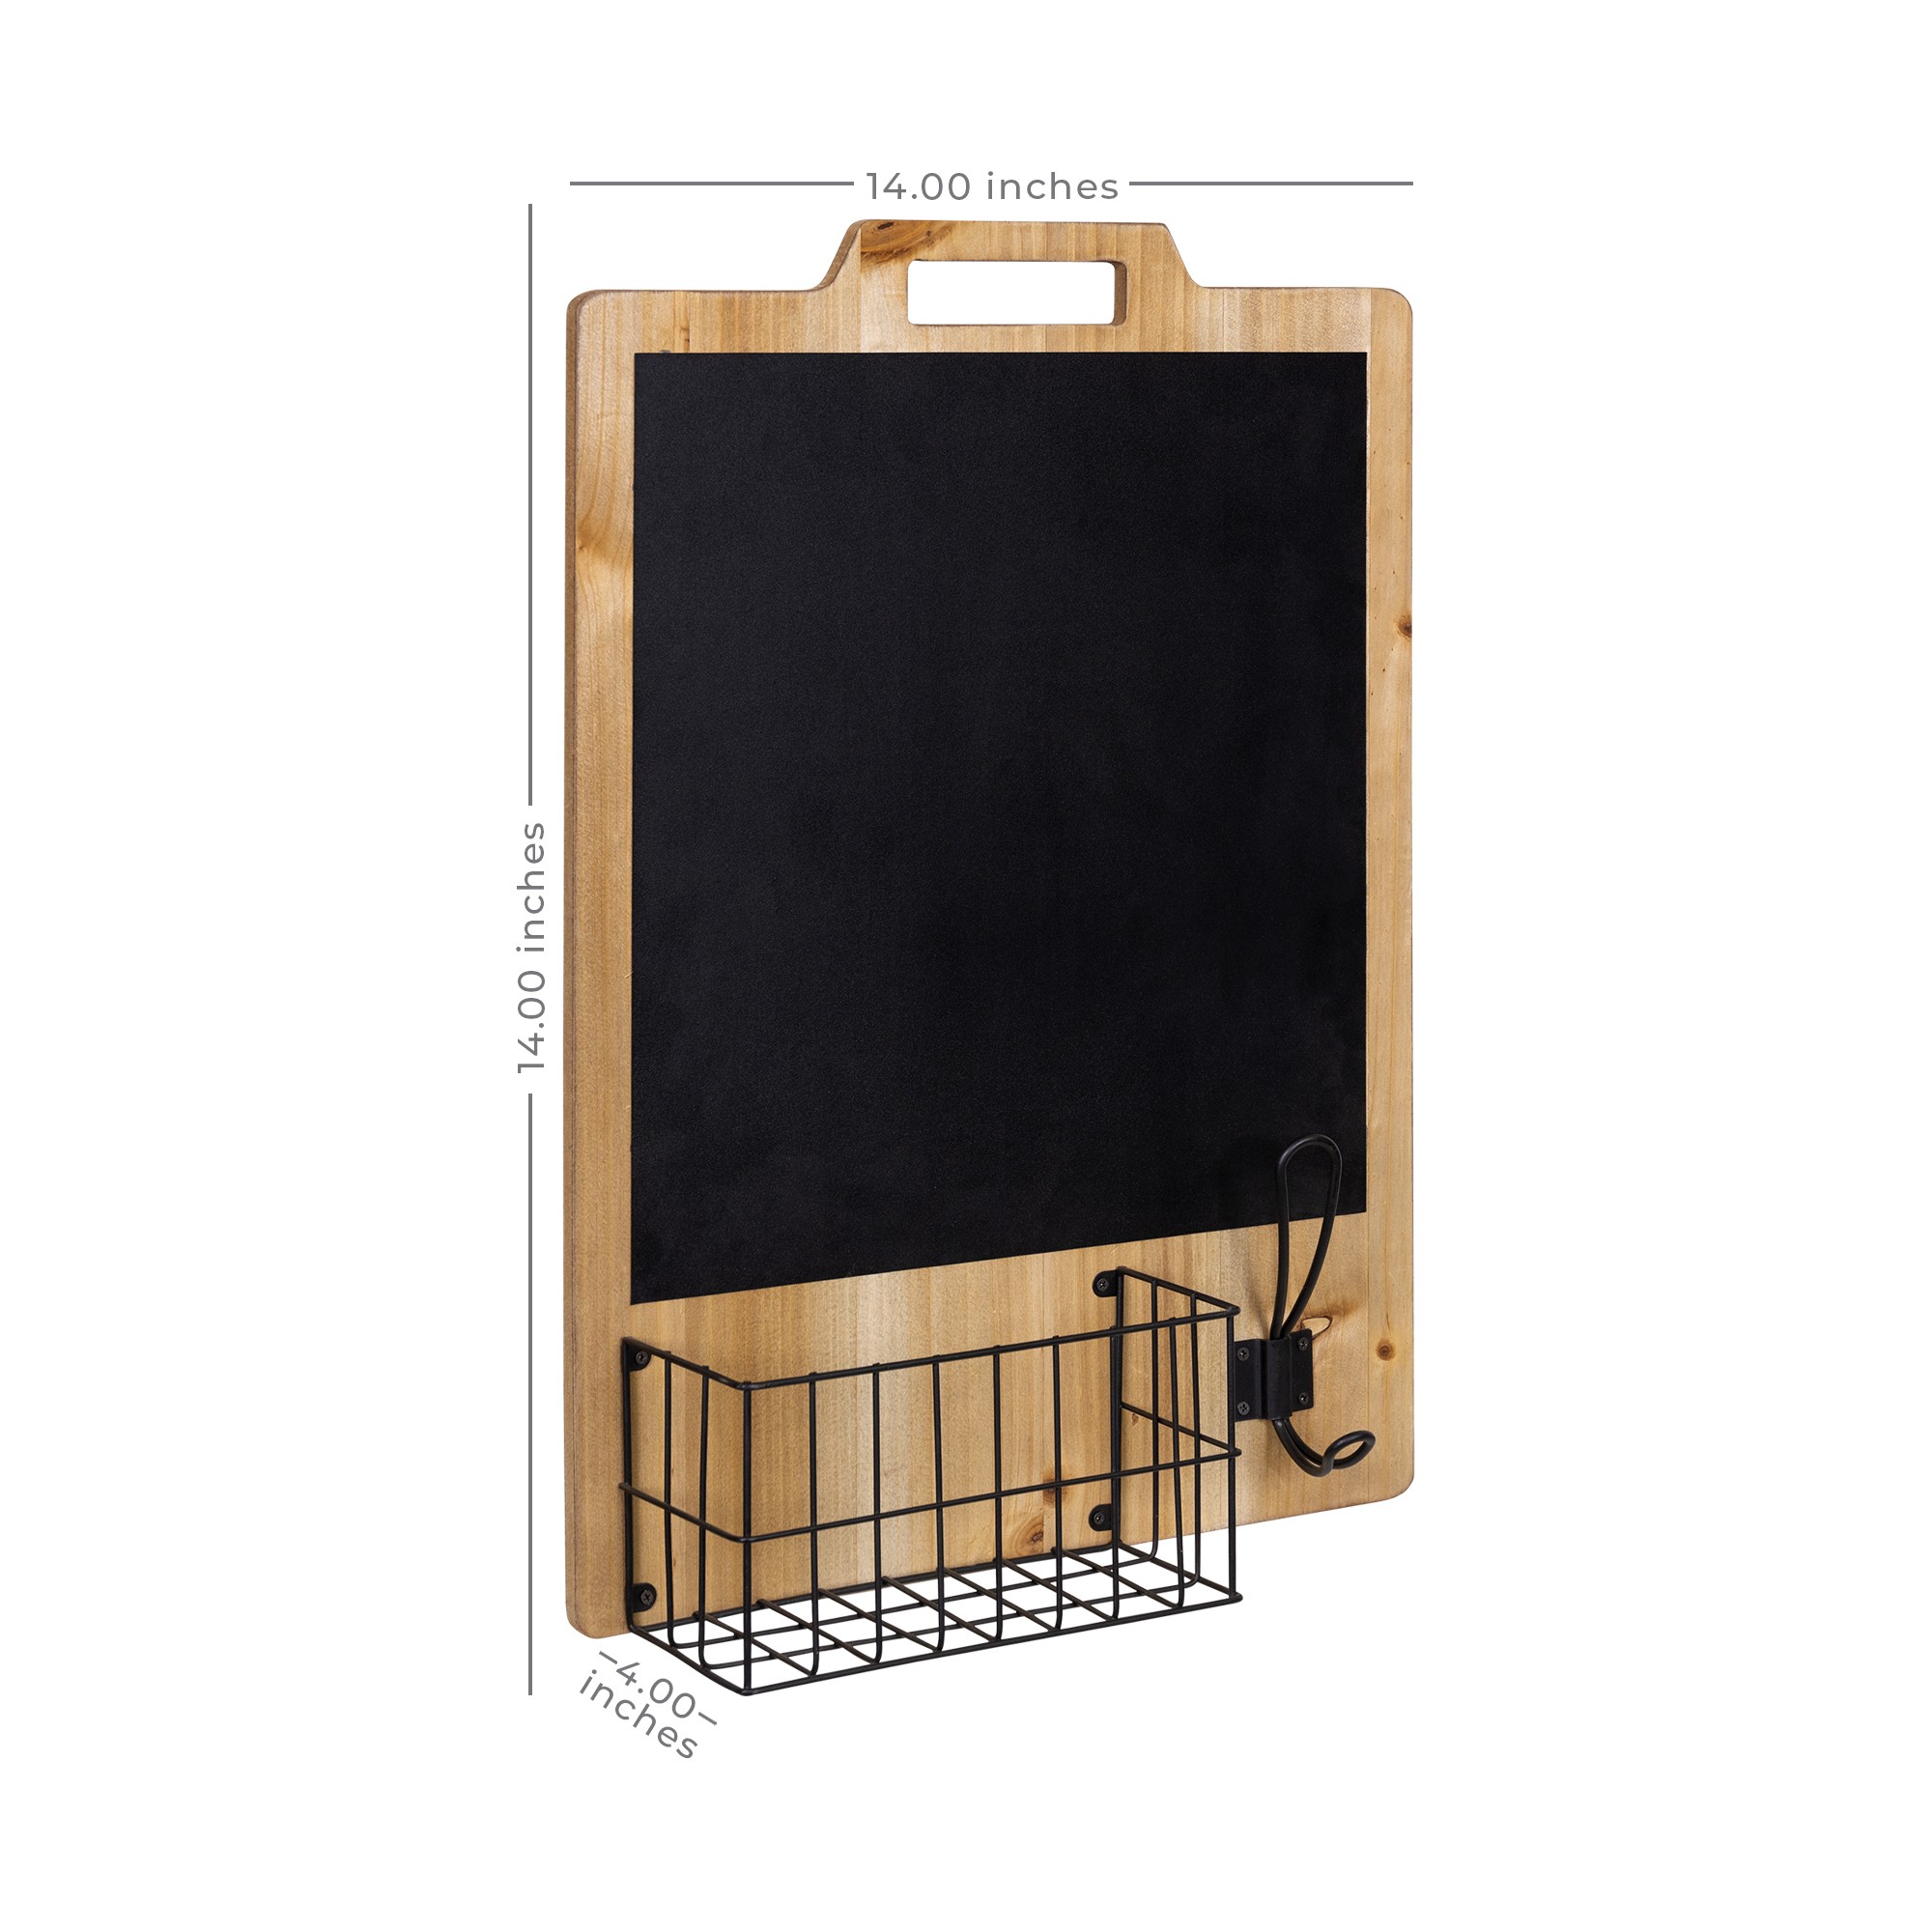 Wooden Wall Chalkboard with Storage Basket and Hook